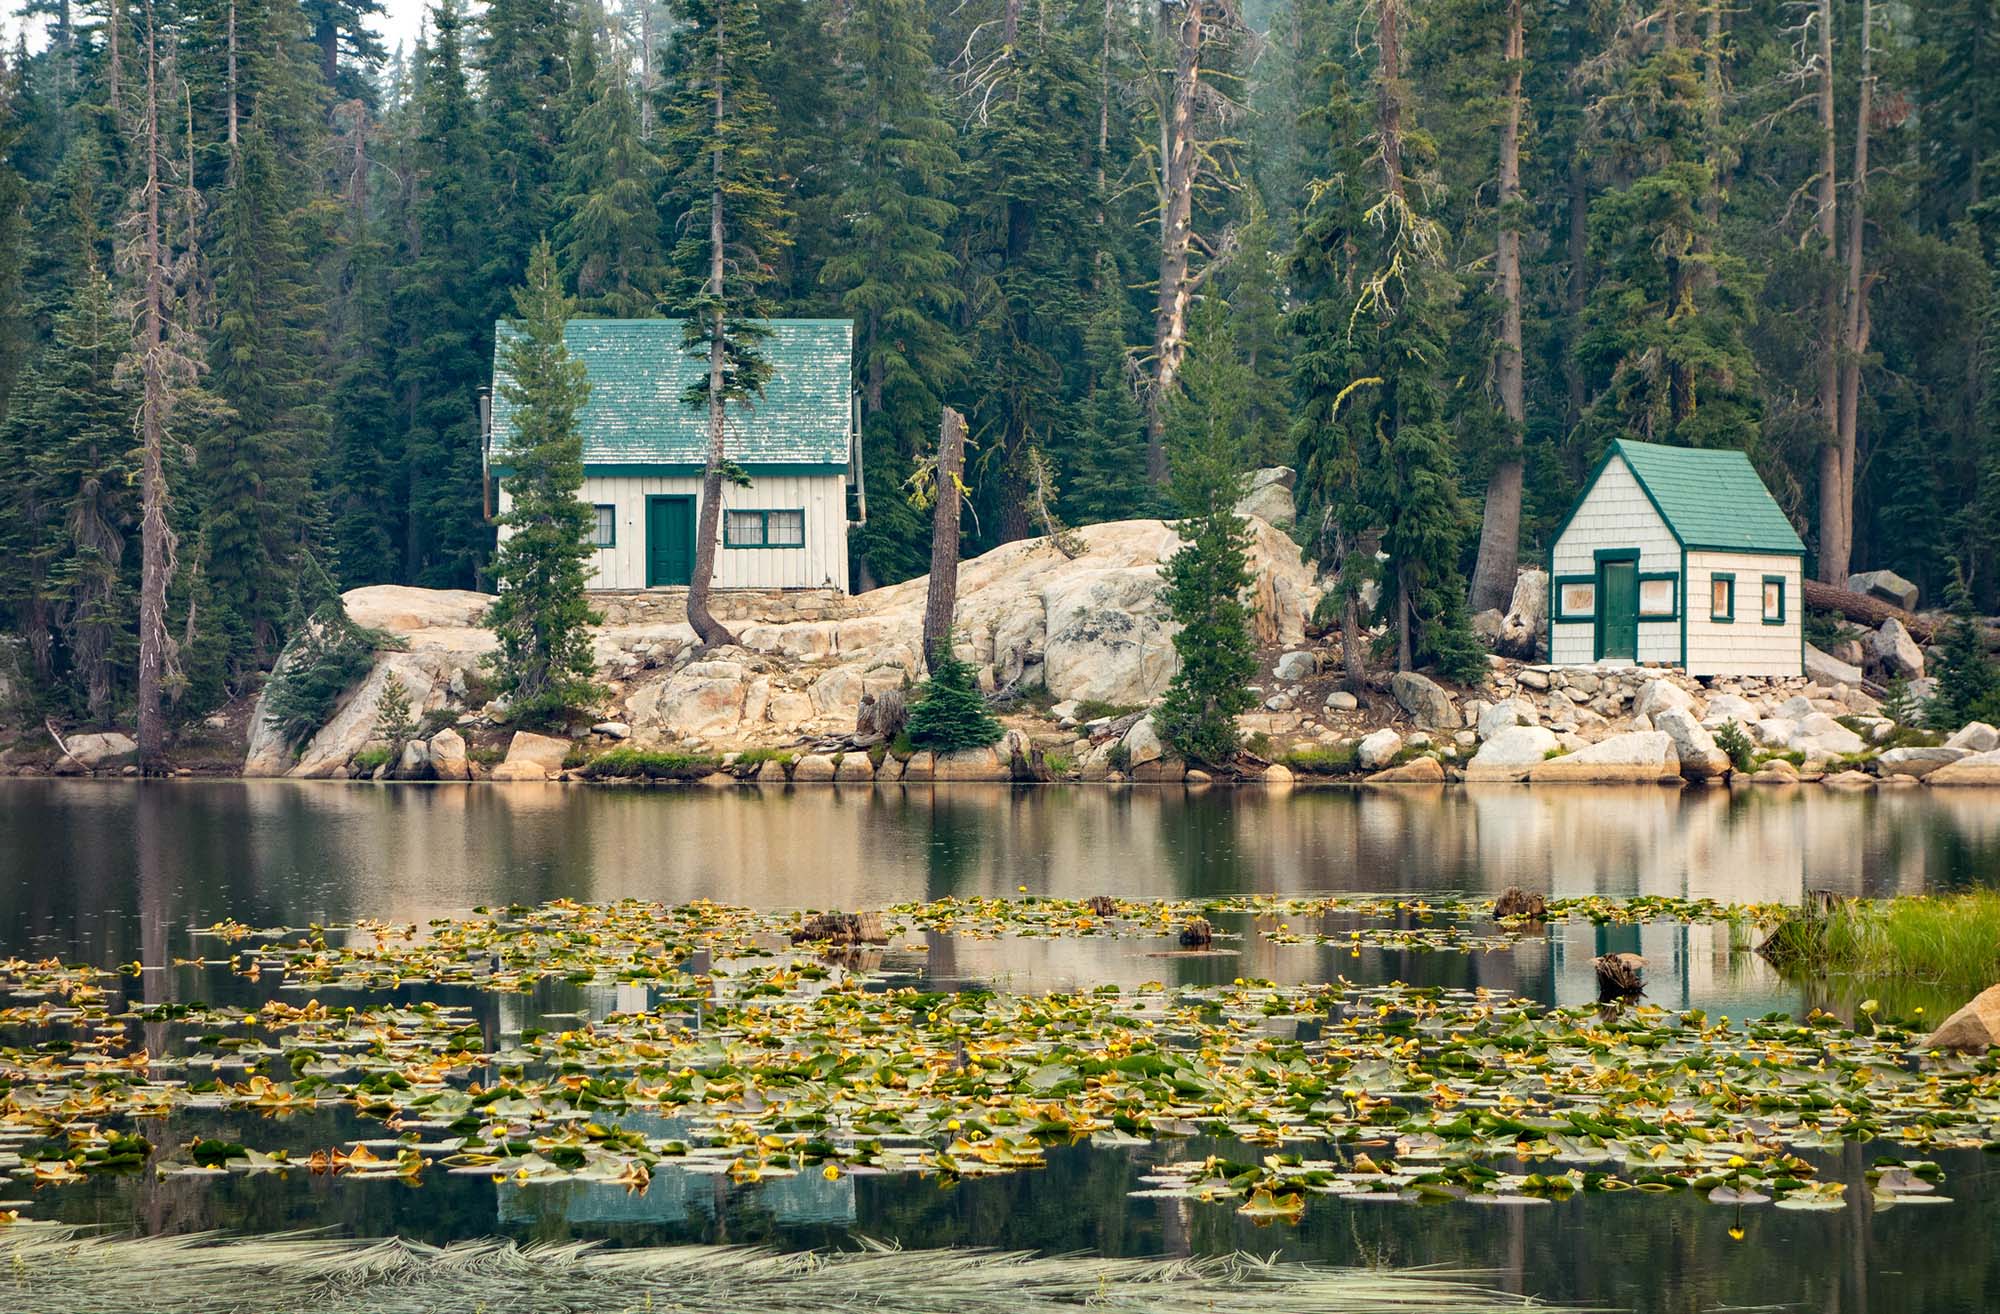 A lake with lilypads and two white cabins with green roofs on rocks overlooking it.